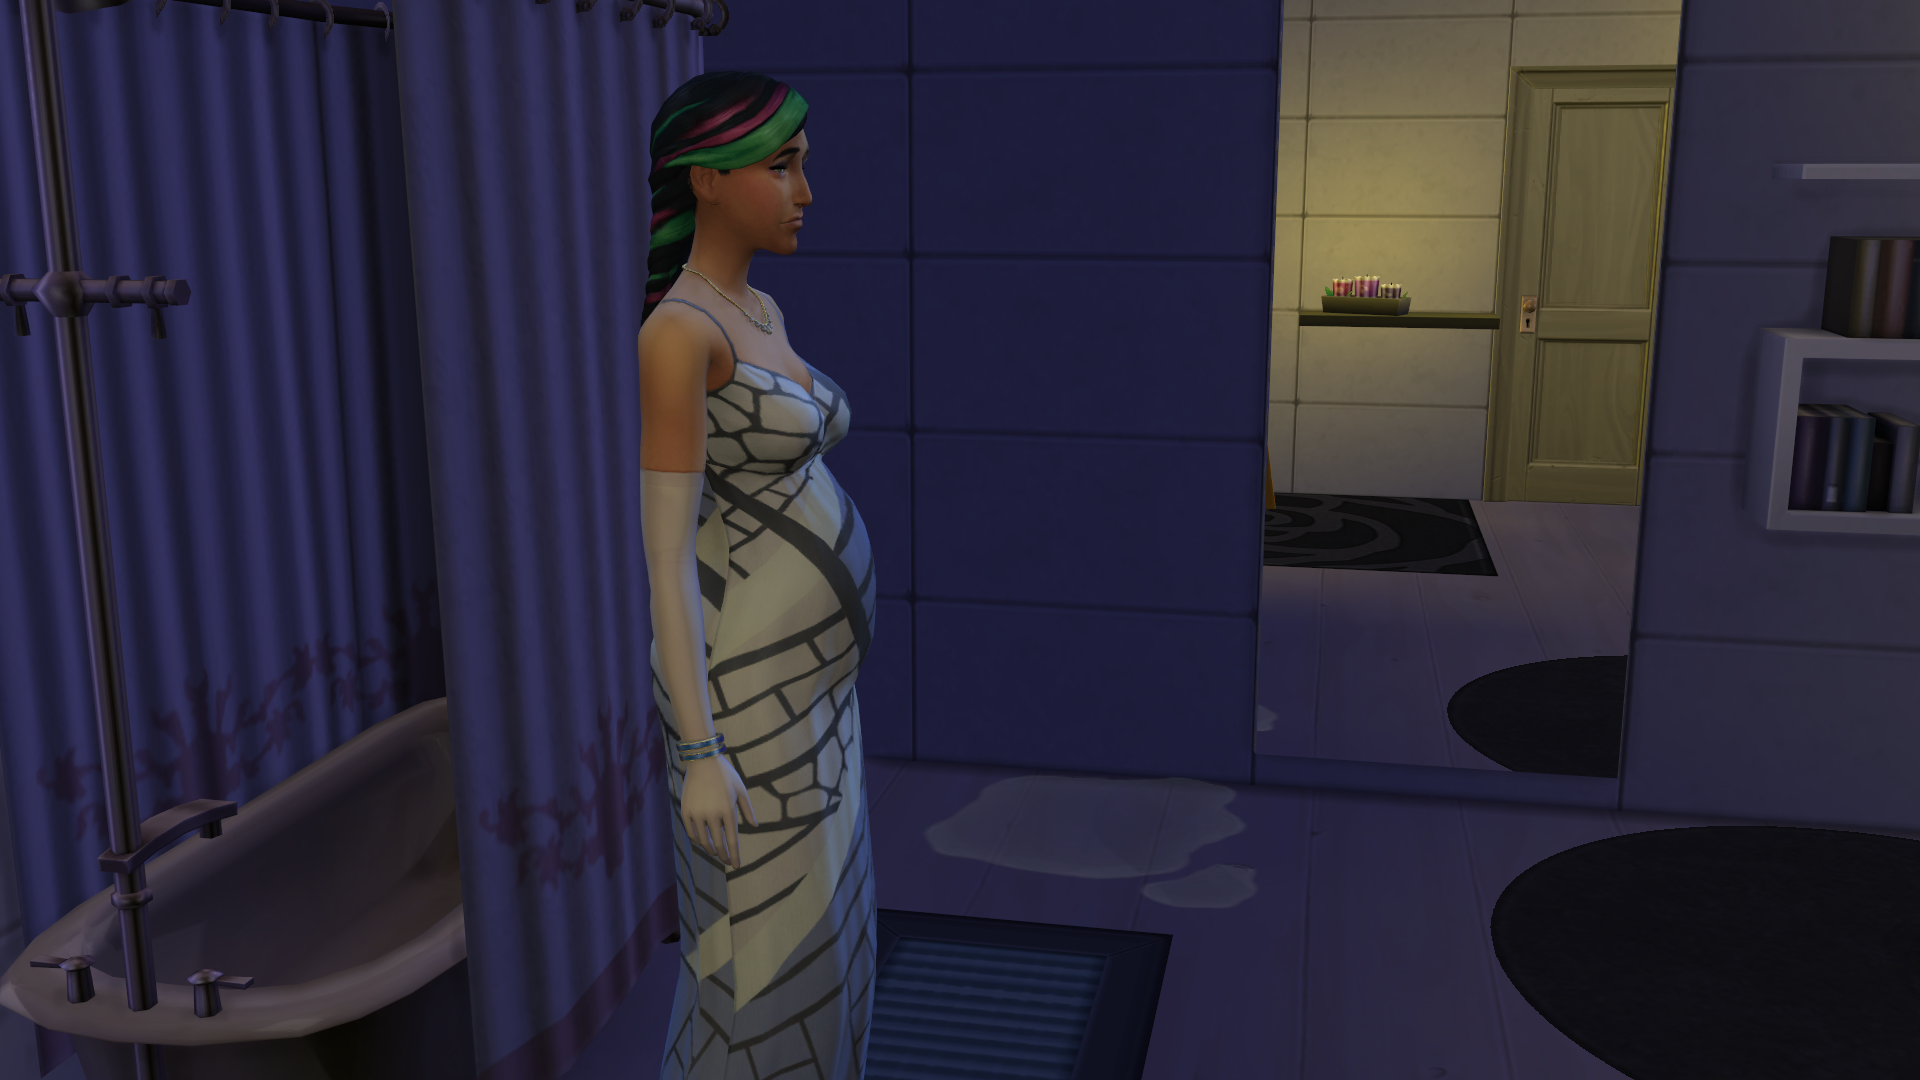 sims 3 bigger pregnant belly